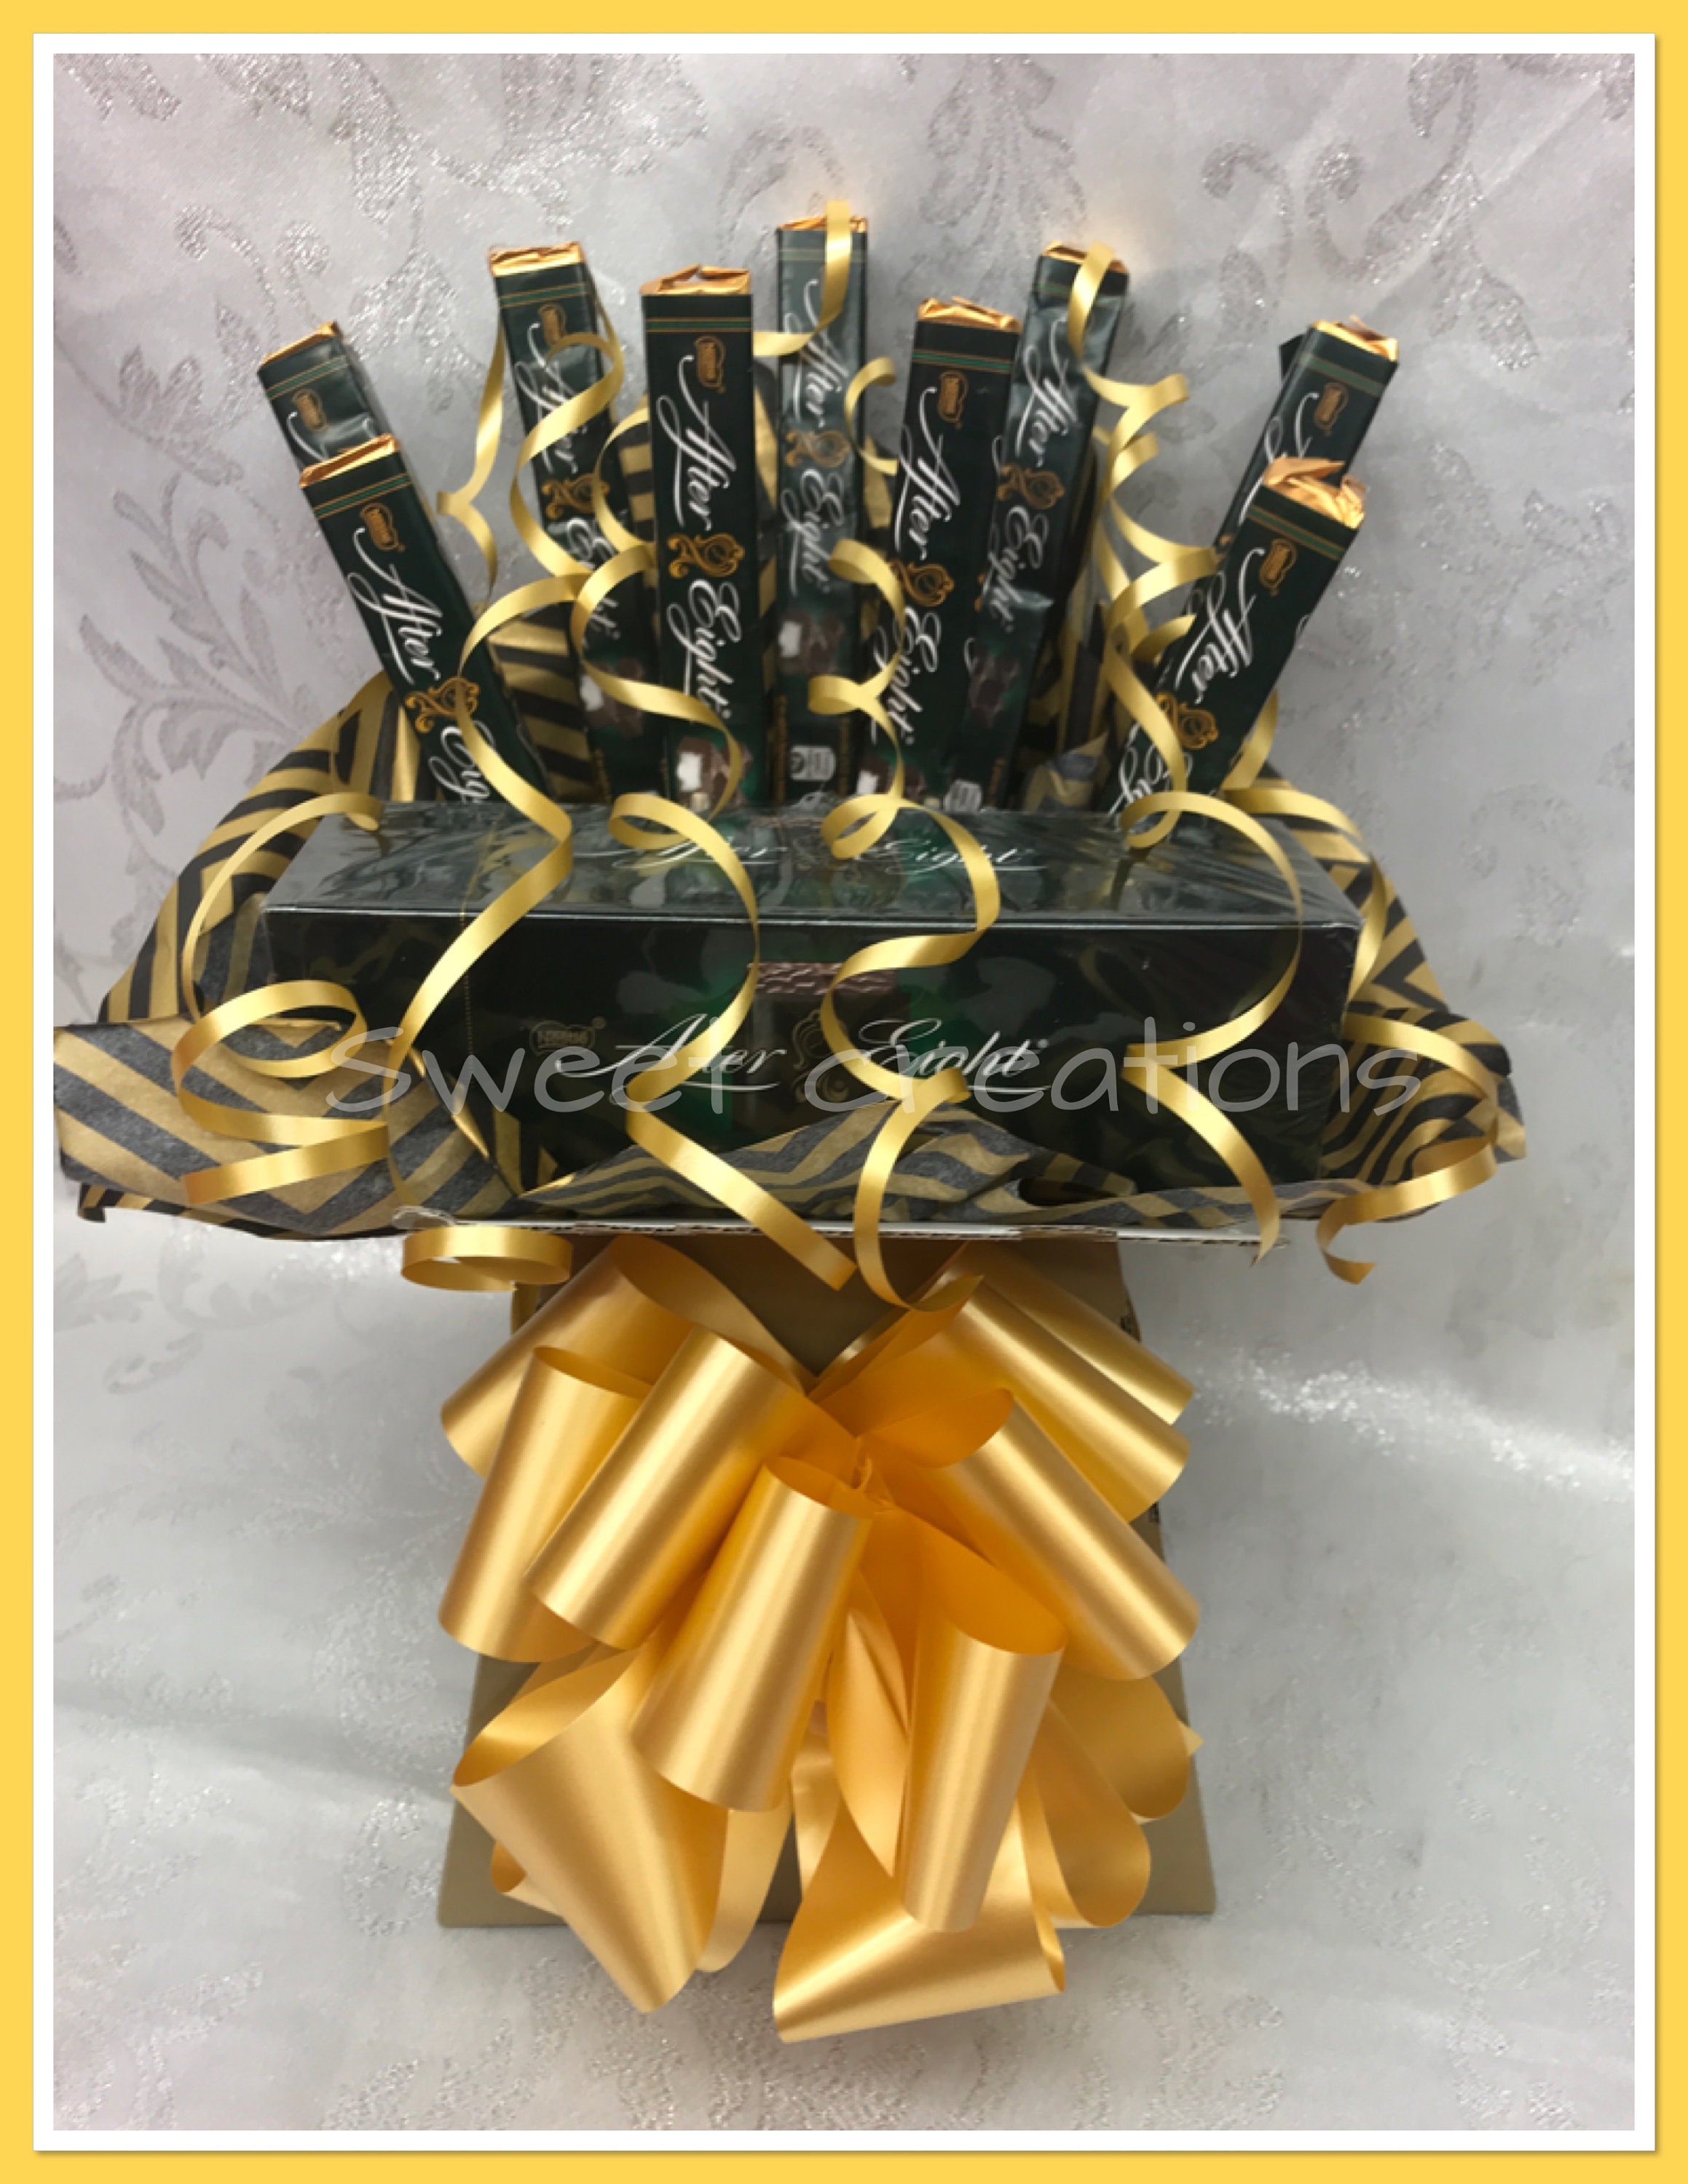 After Eight Chocolate Bouquet -  Sweden